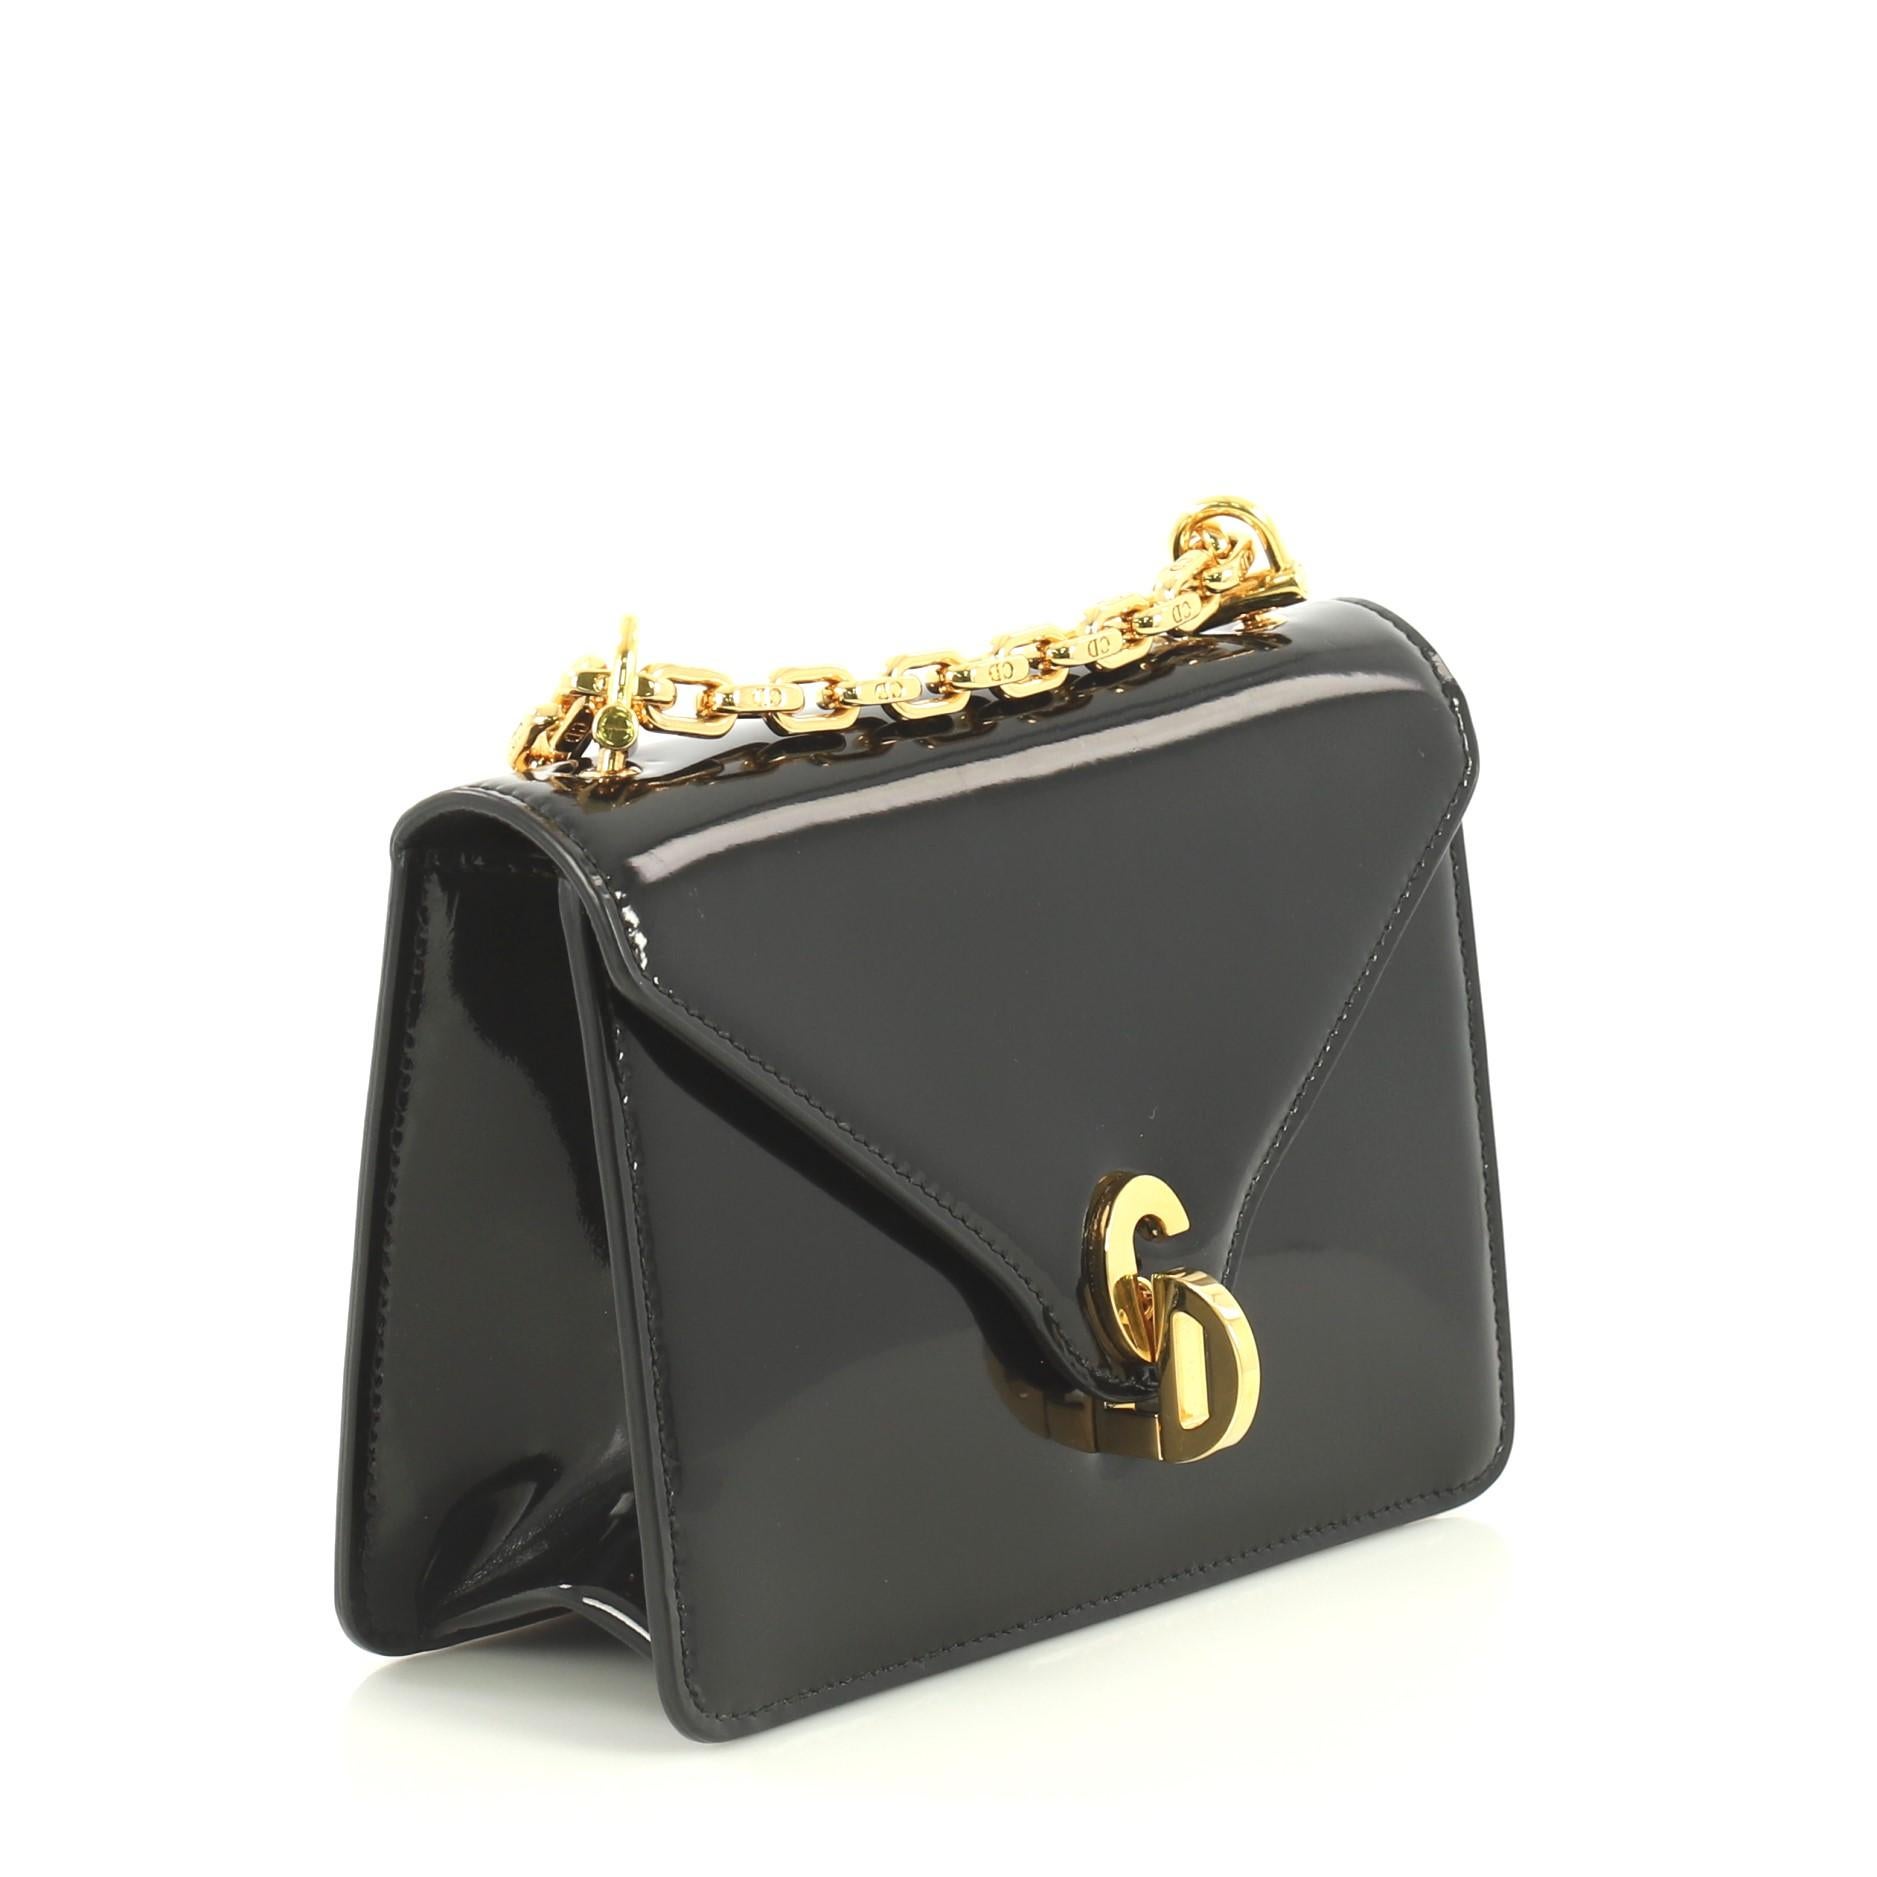 This Christian Dior C'est Dior Flap Bag Patent Mini, crafted in black patent leather, features chain link shoulder strap, front flap with CD twist lock and gold-tone hardware. Its twist-lock closure opens to a black suede interior with zip pocket.